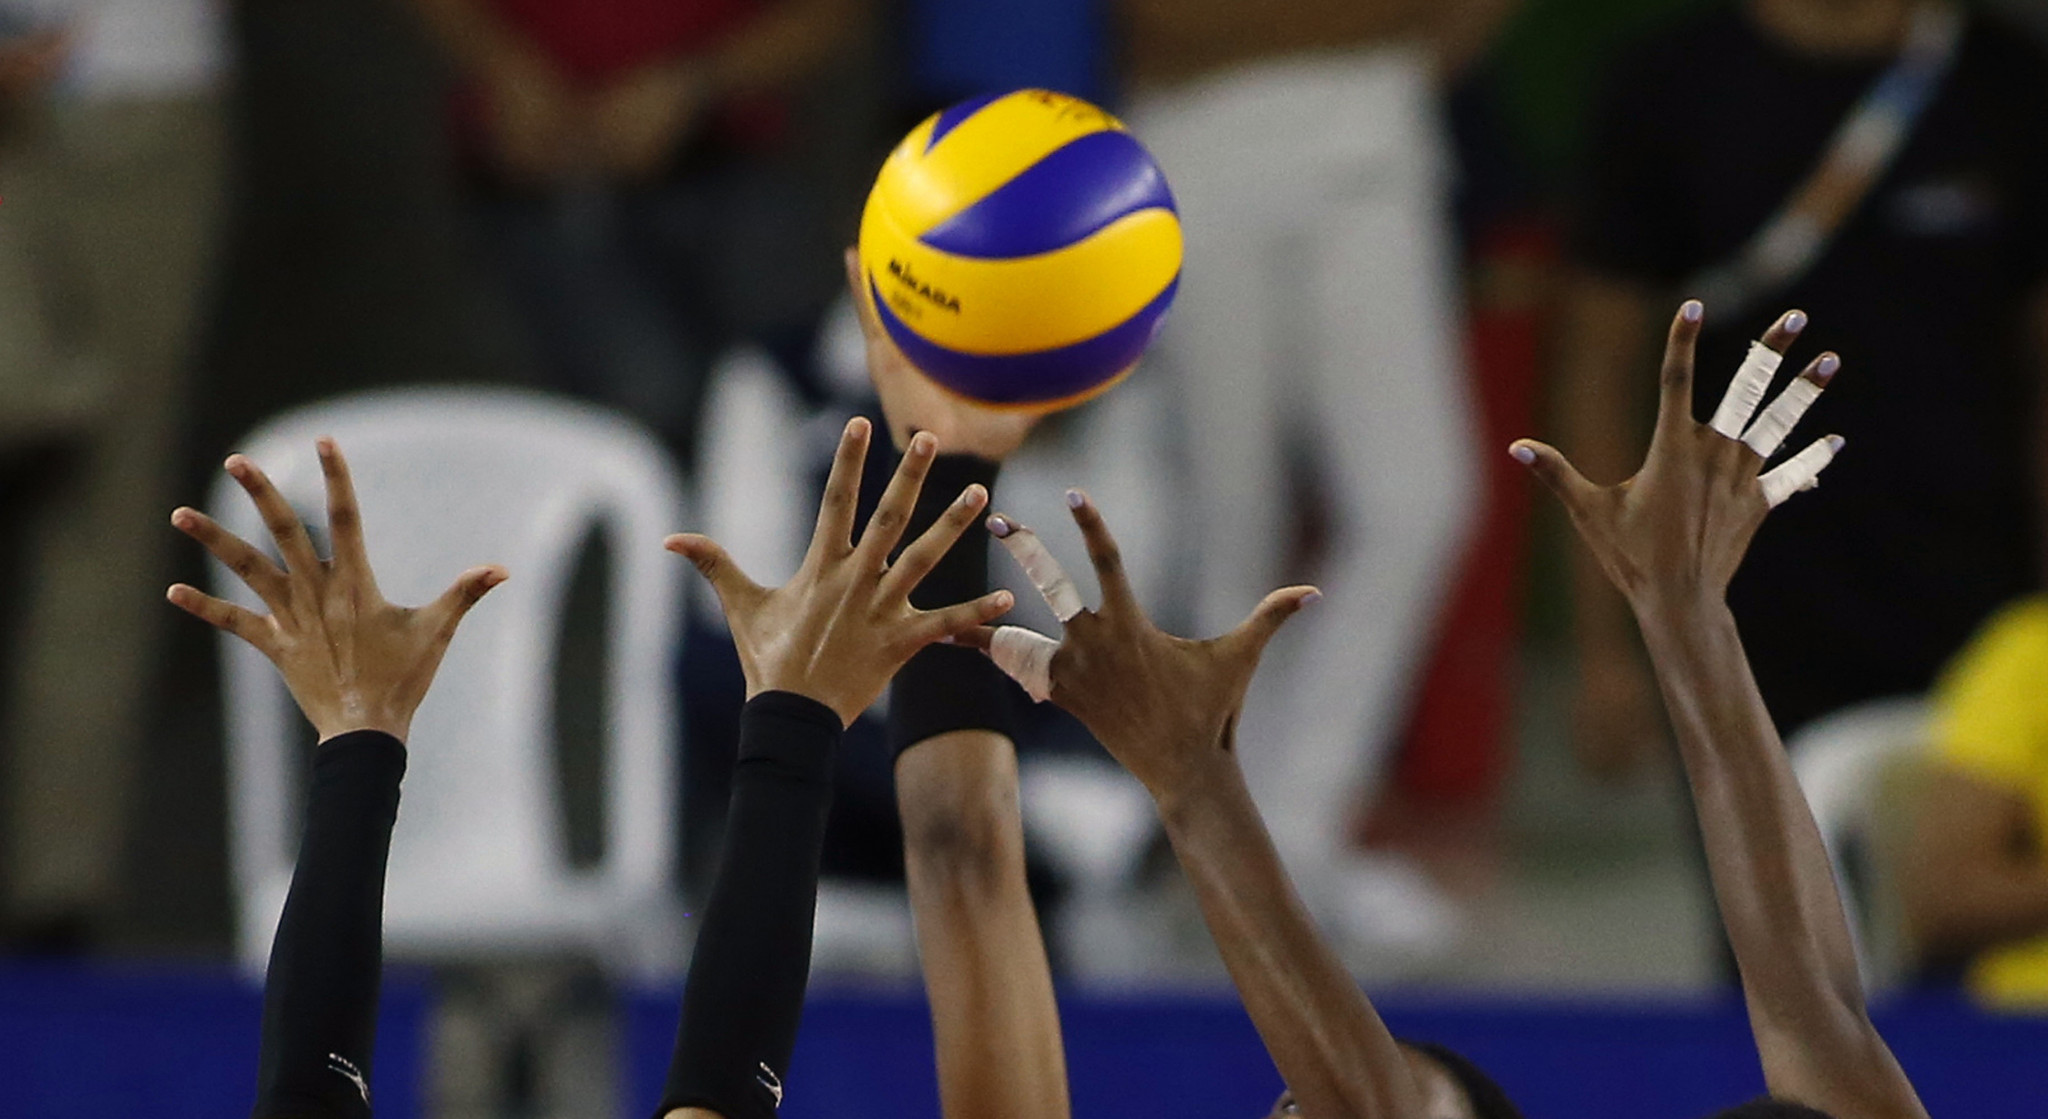 Venues for 2022 Volleyball Men's World Championship announced